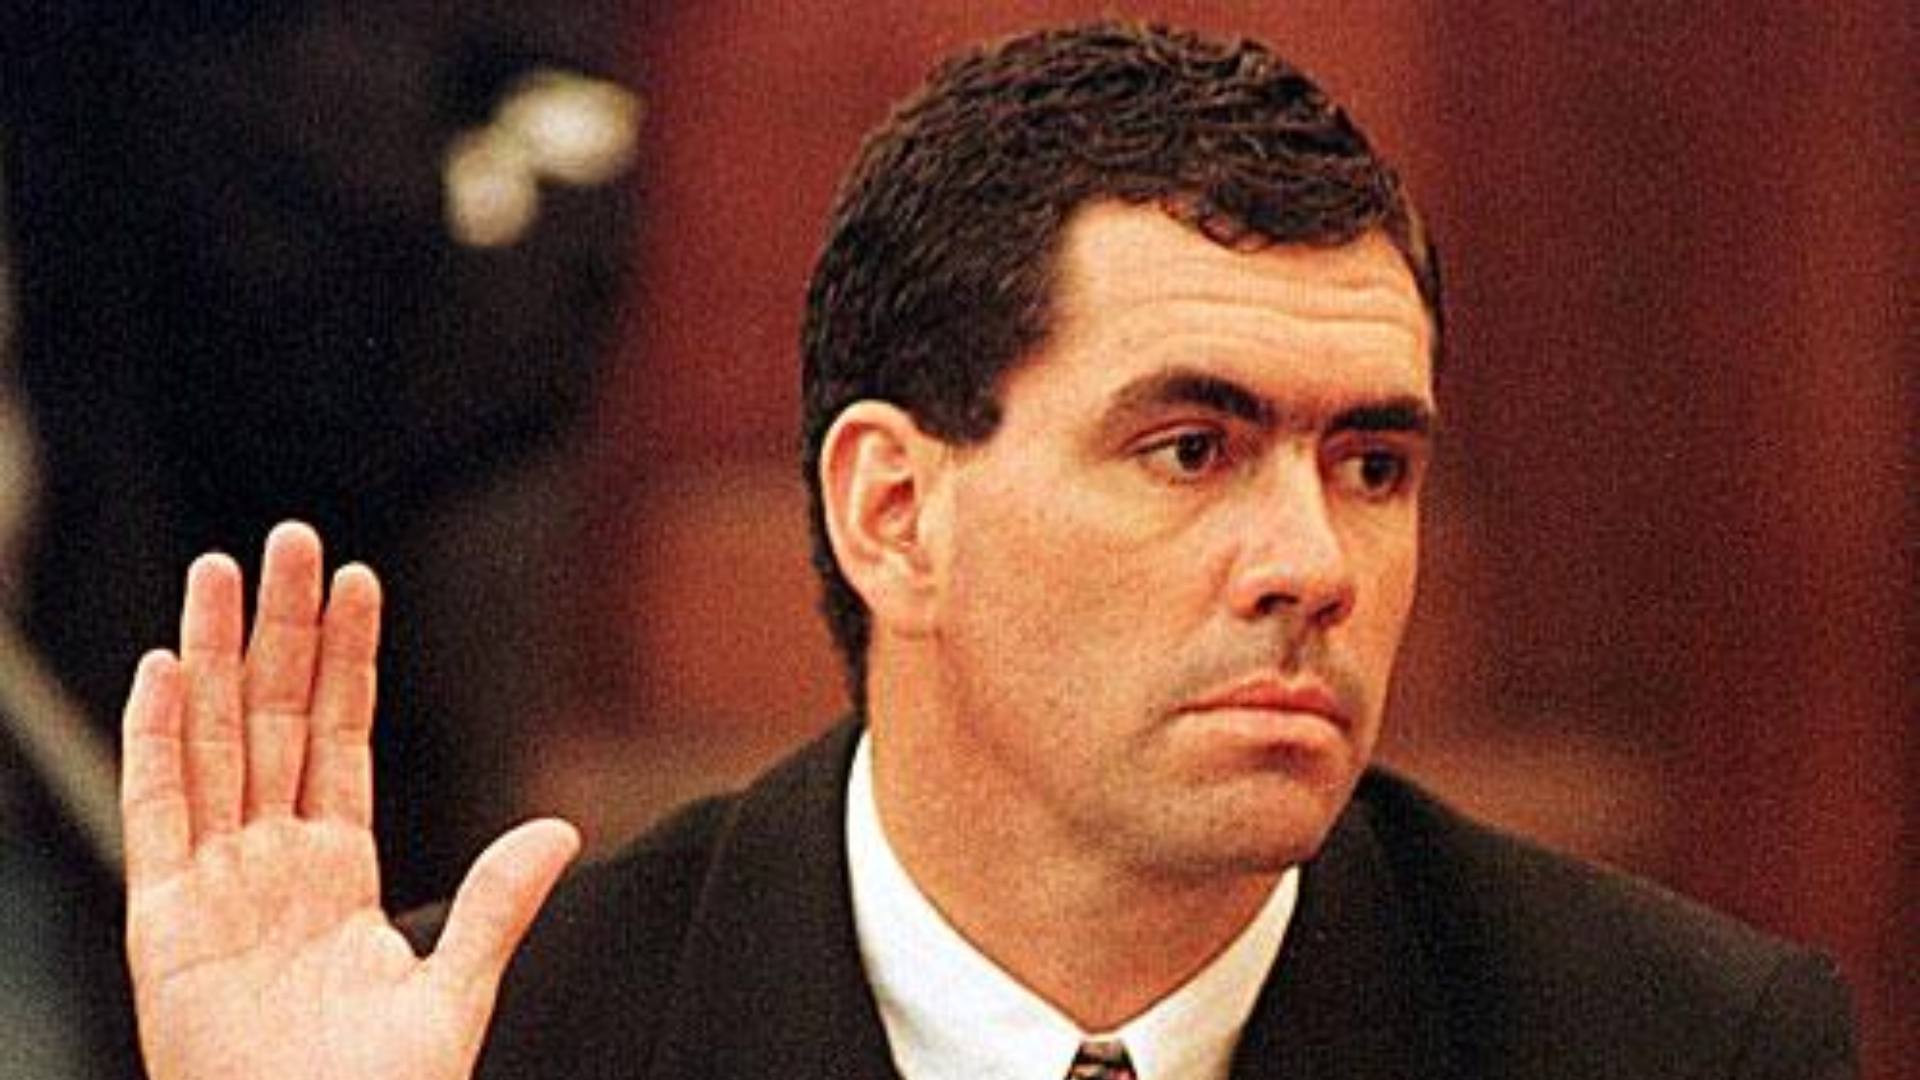 Hansie Cronje was a national icon for South Africa until the match-fixing scandal erupted.